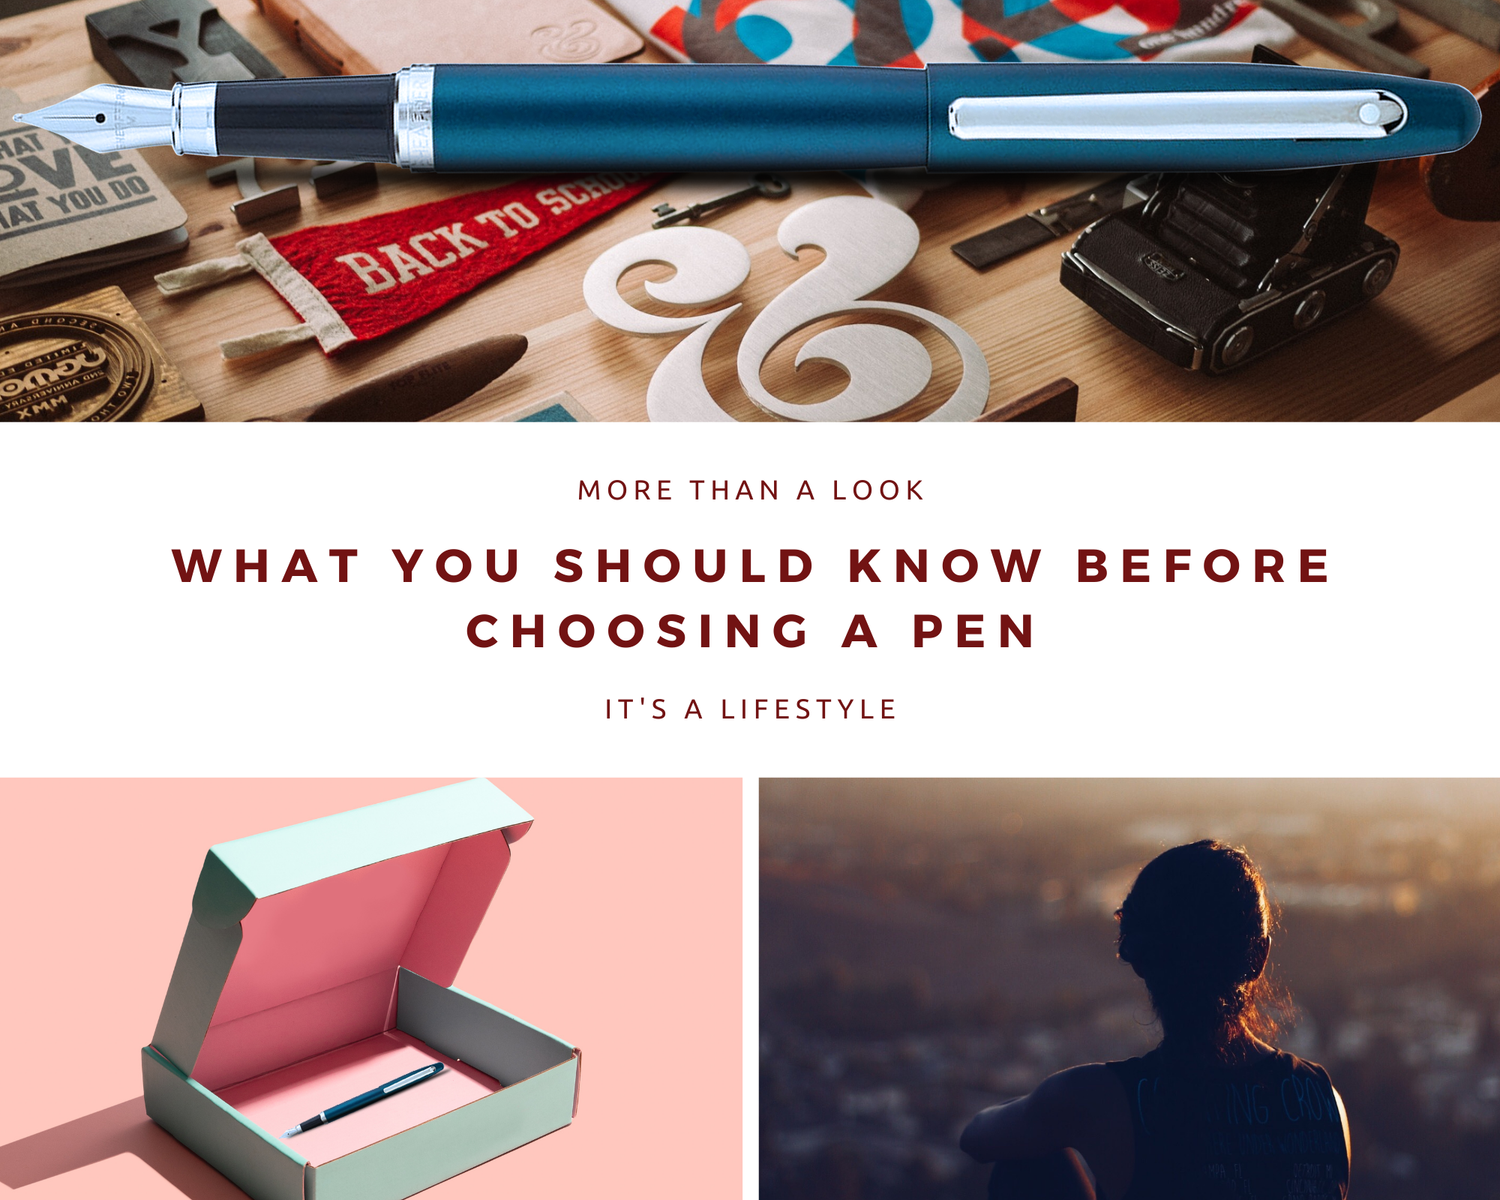 What You Should Know Before Choosing a Pen